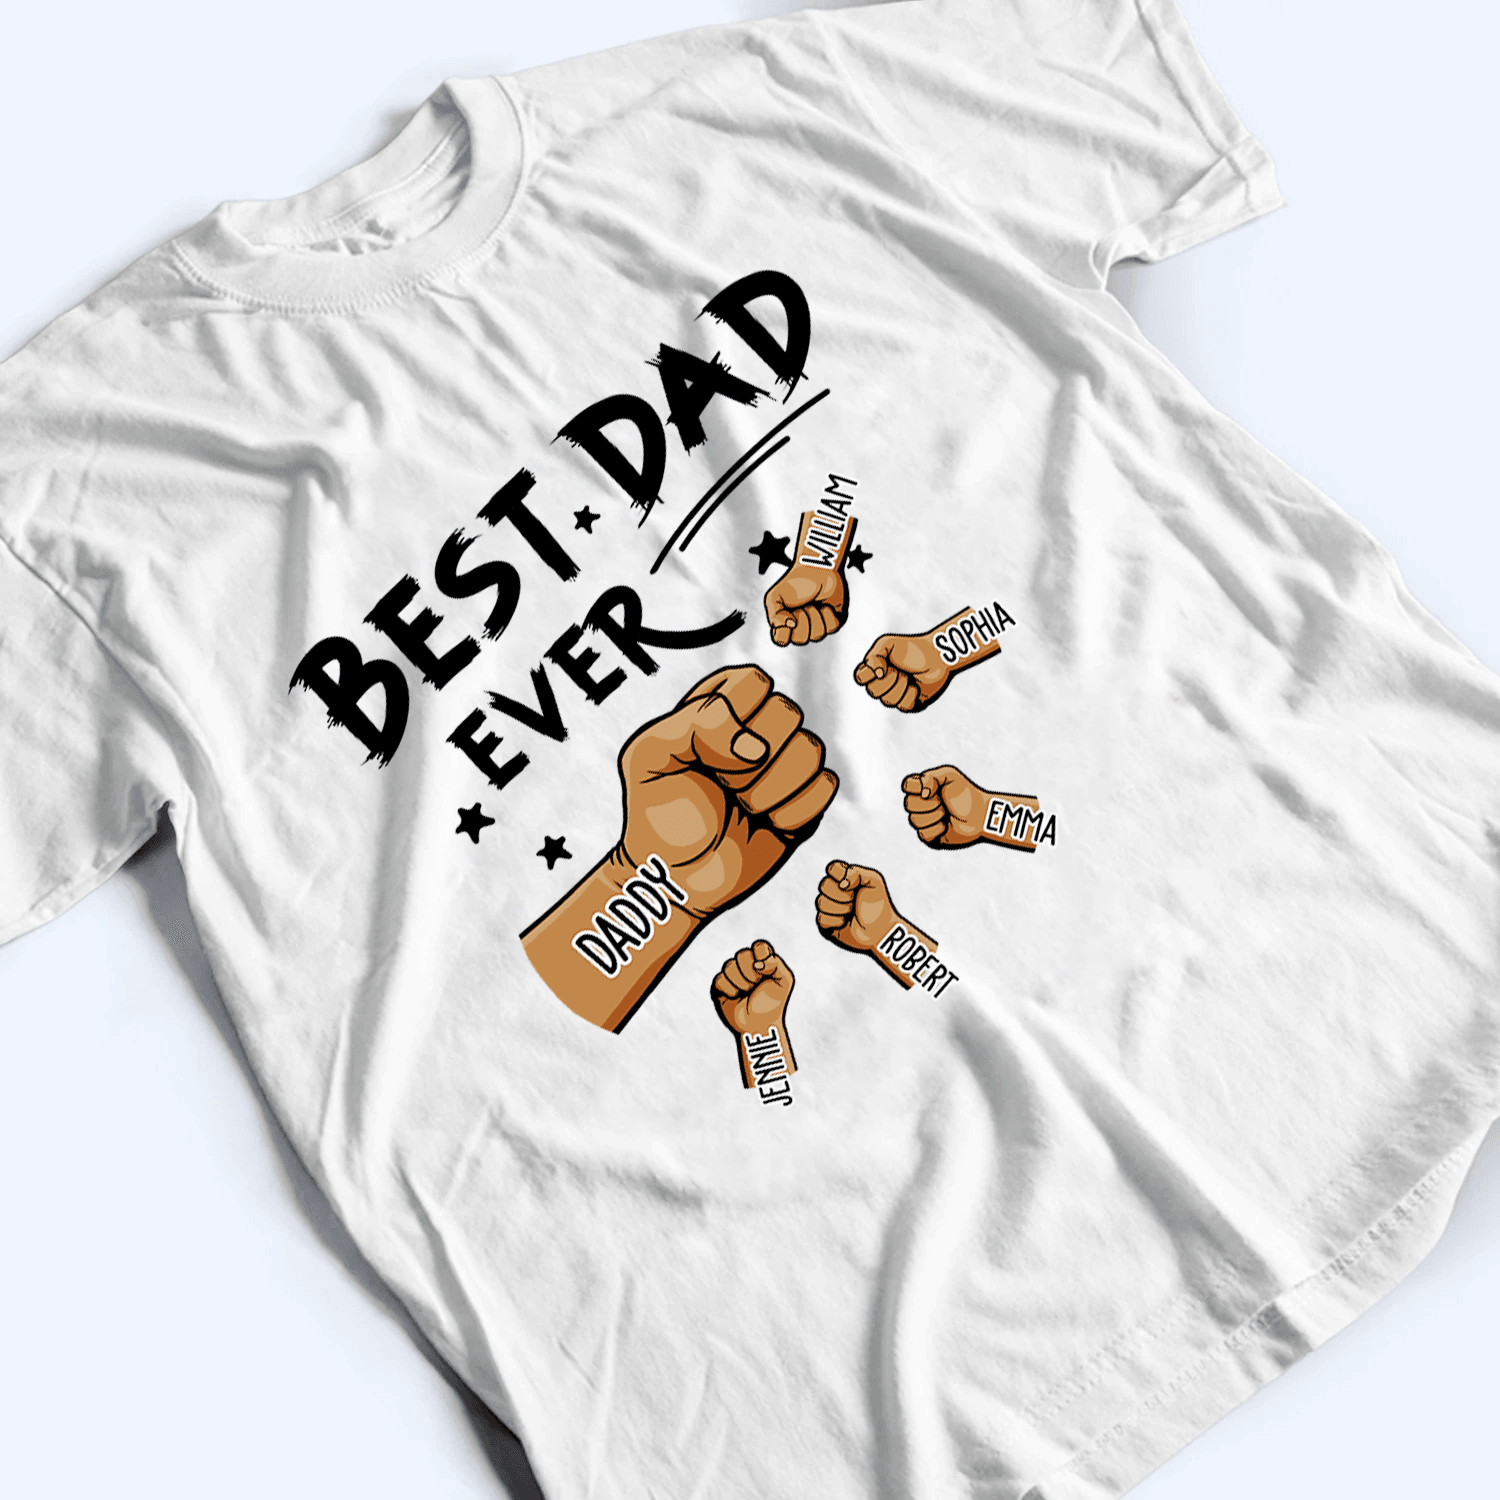 The Best Dad Ever - Personalized Custom T Shirt - Father's Day Gift for Dad, Papa, Grandpa, Daddy, Dada